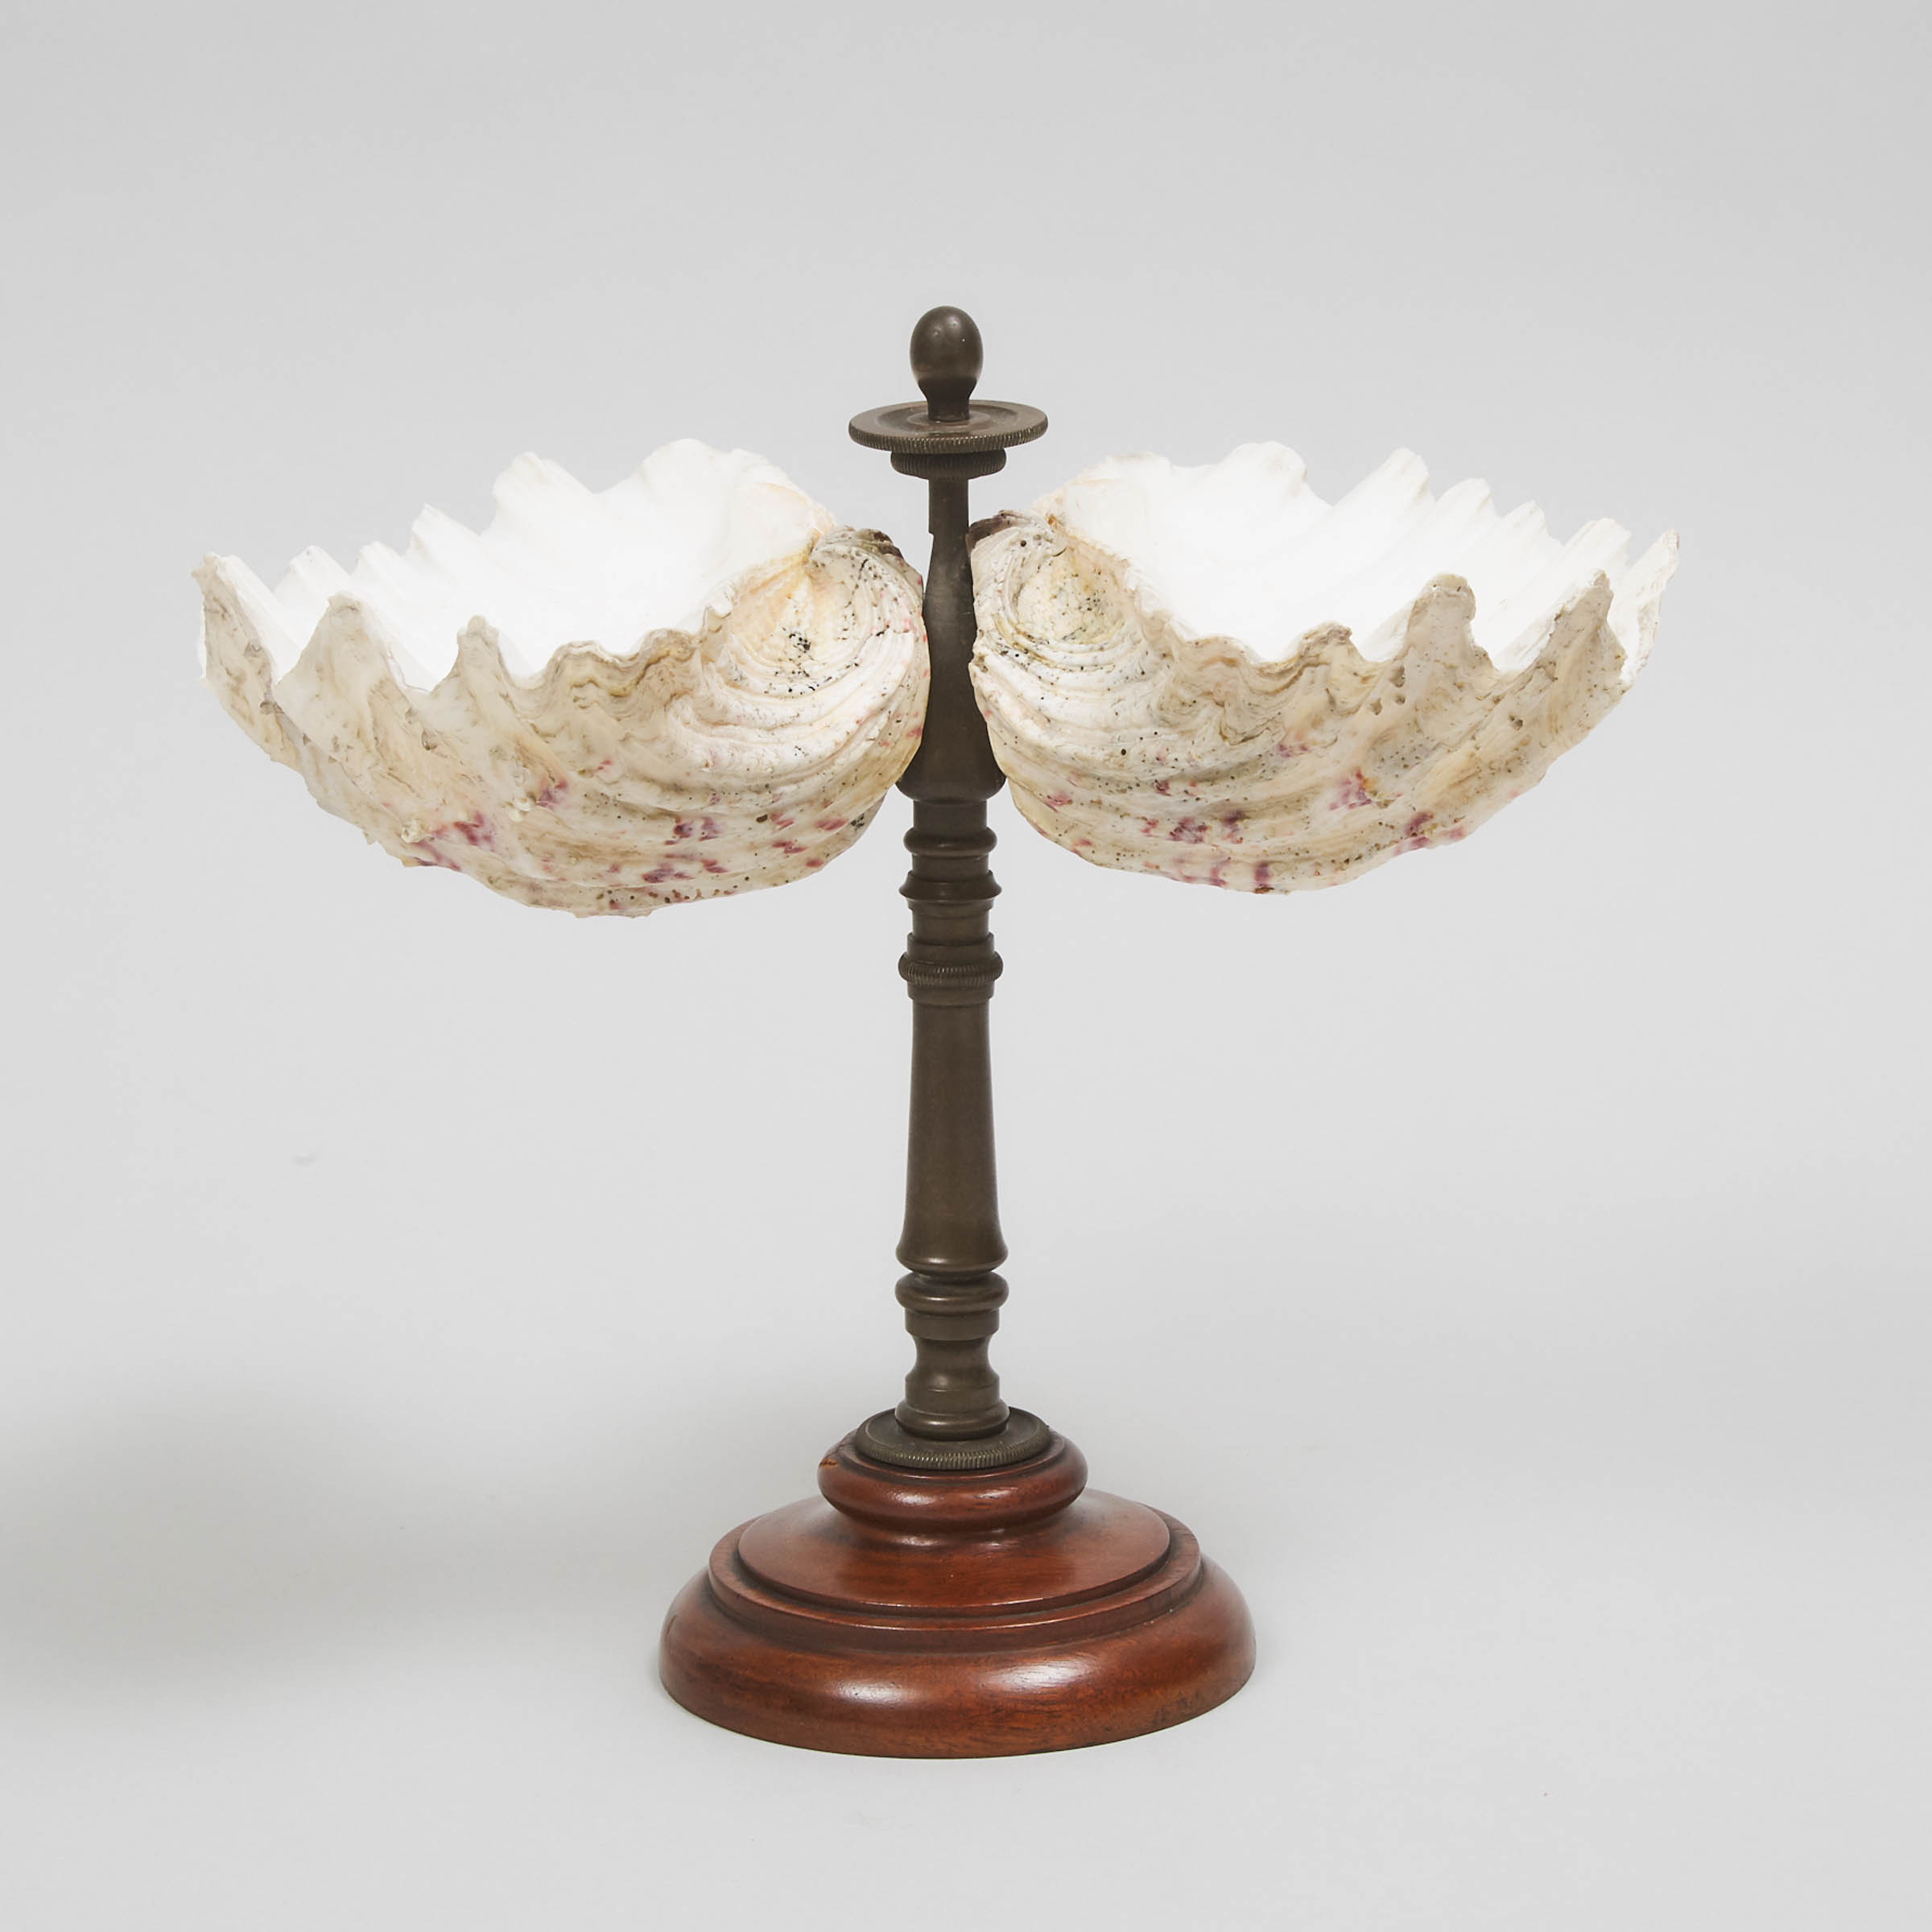 Victorian Natural Sea Shell Dish on Stand, 19th century